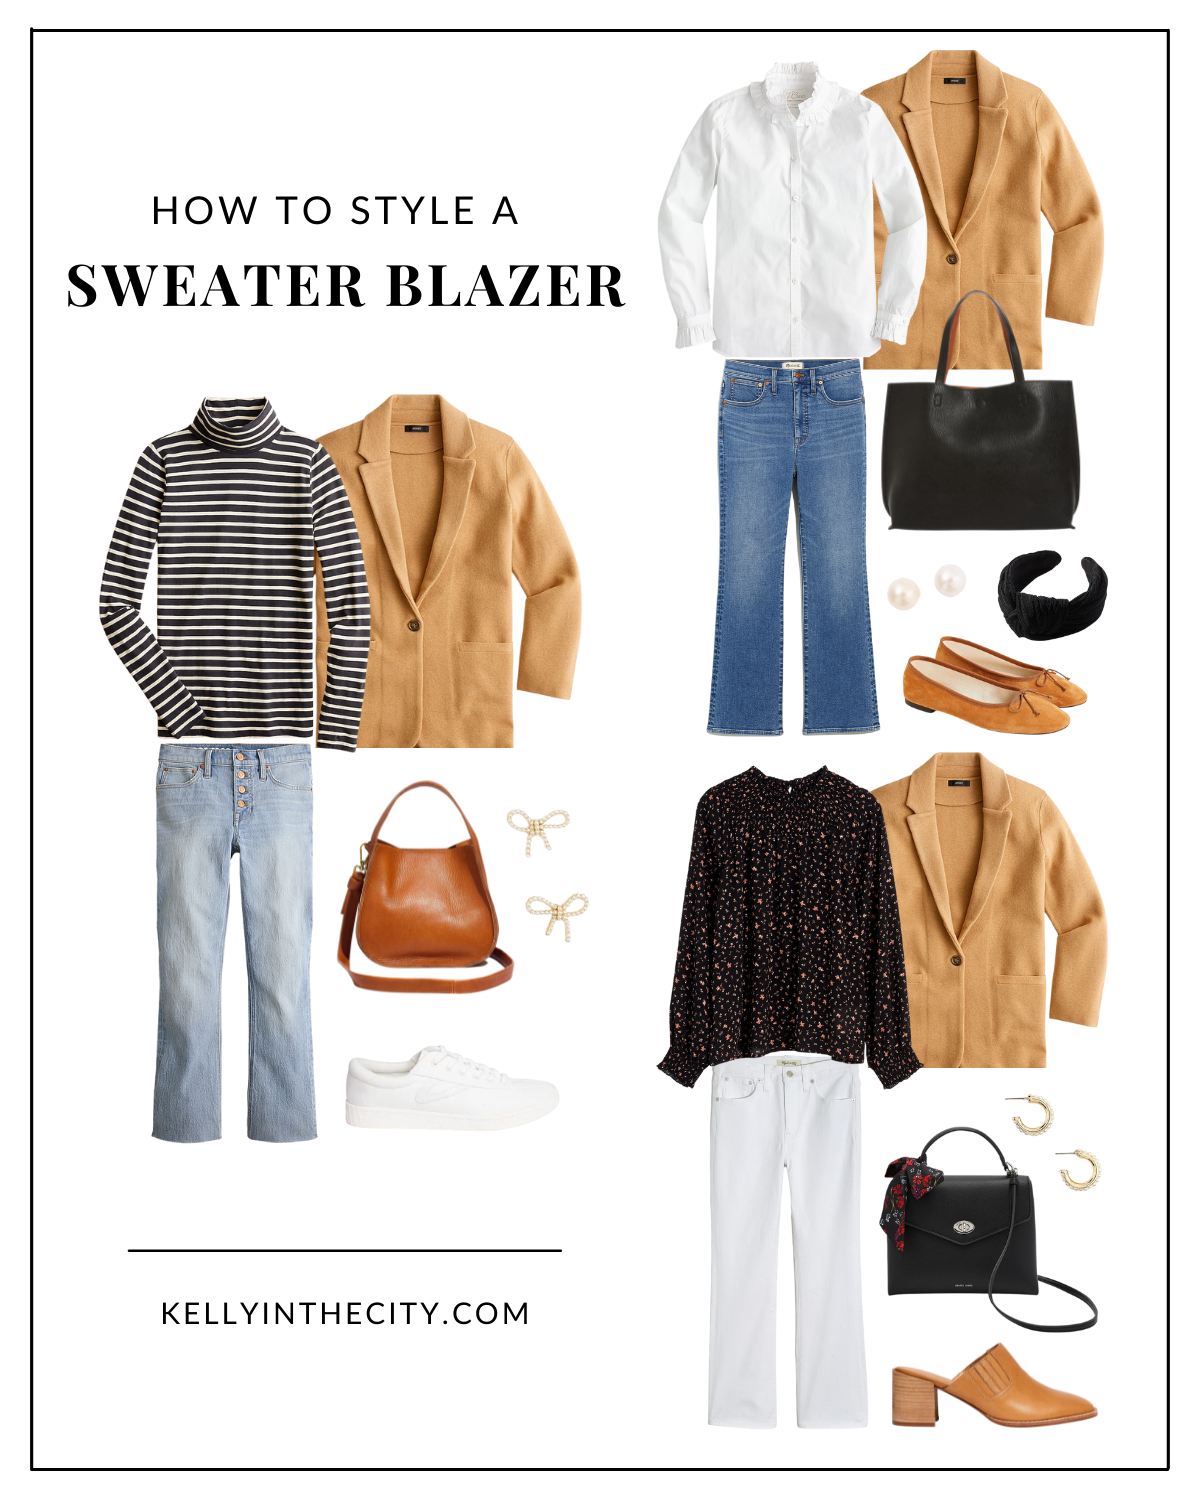 How to Style a Sweater Blazer